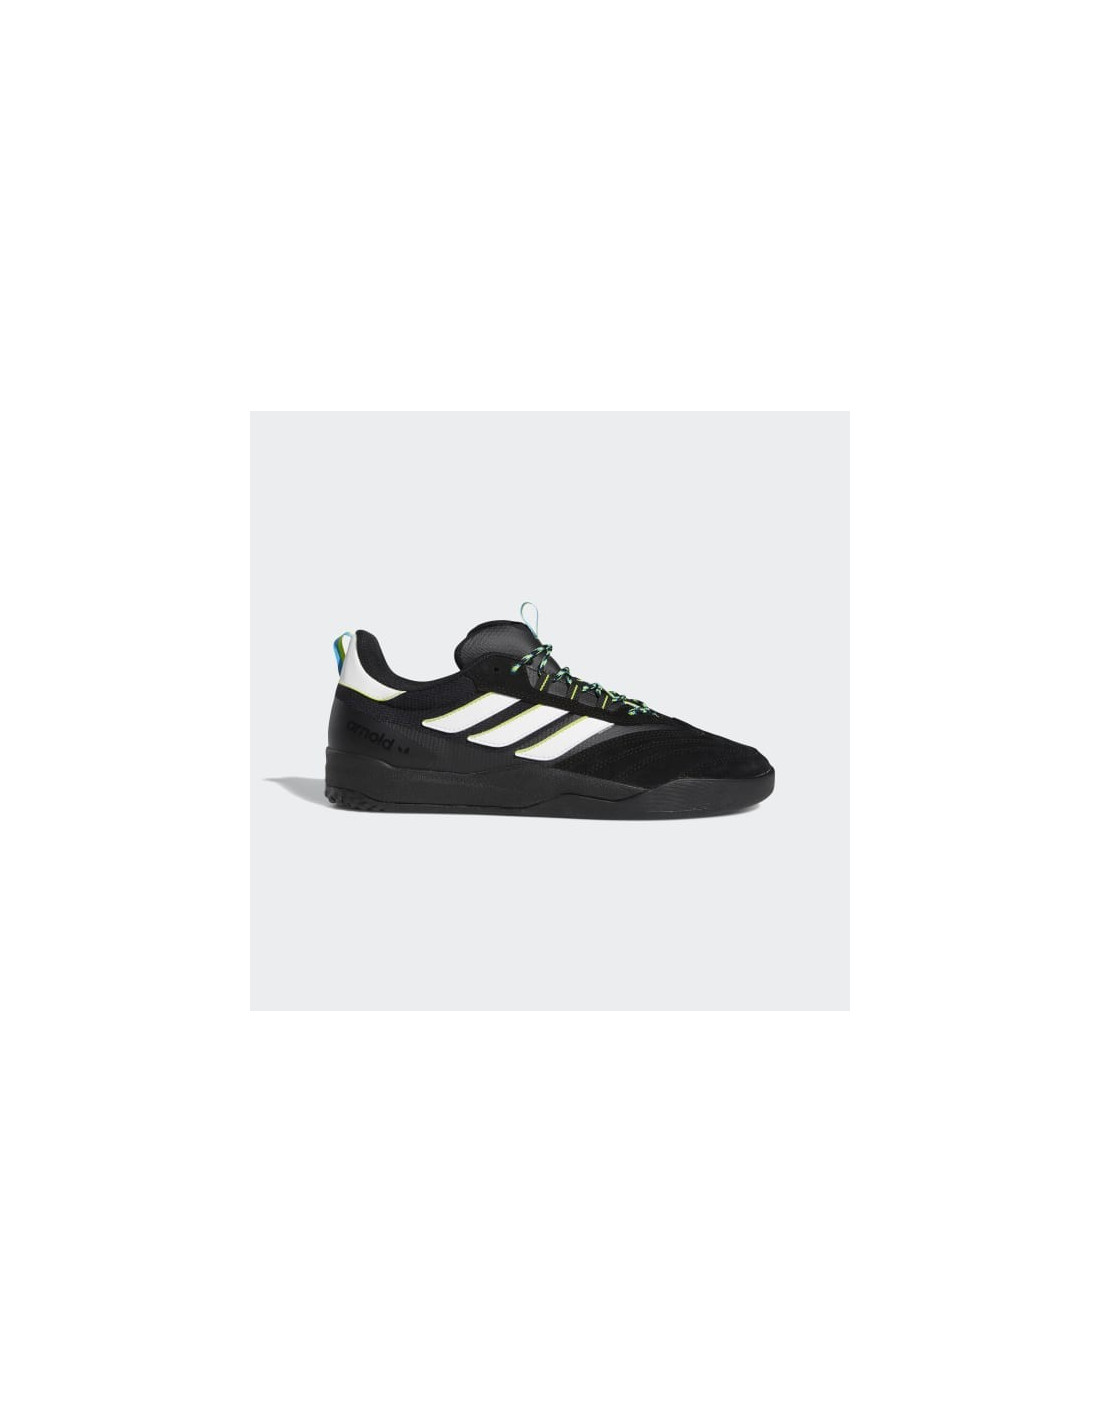 Adidas Copa Nationale x